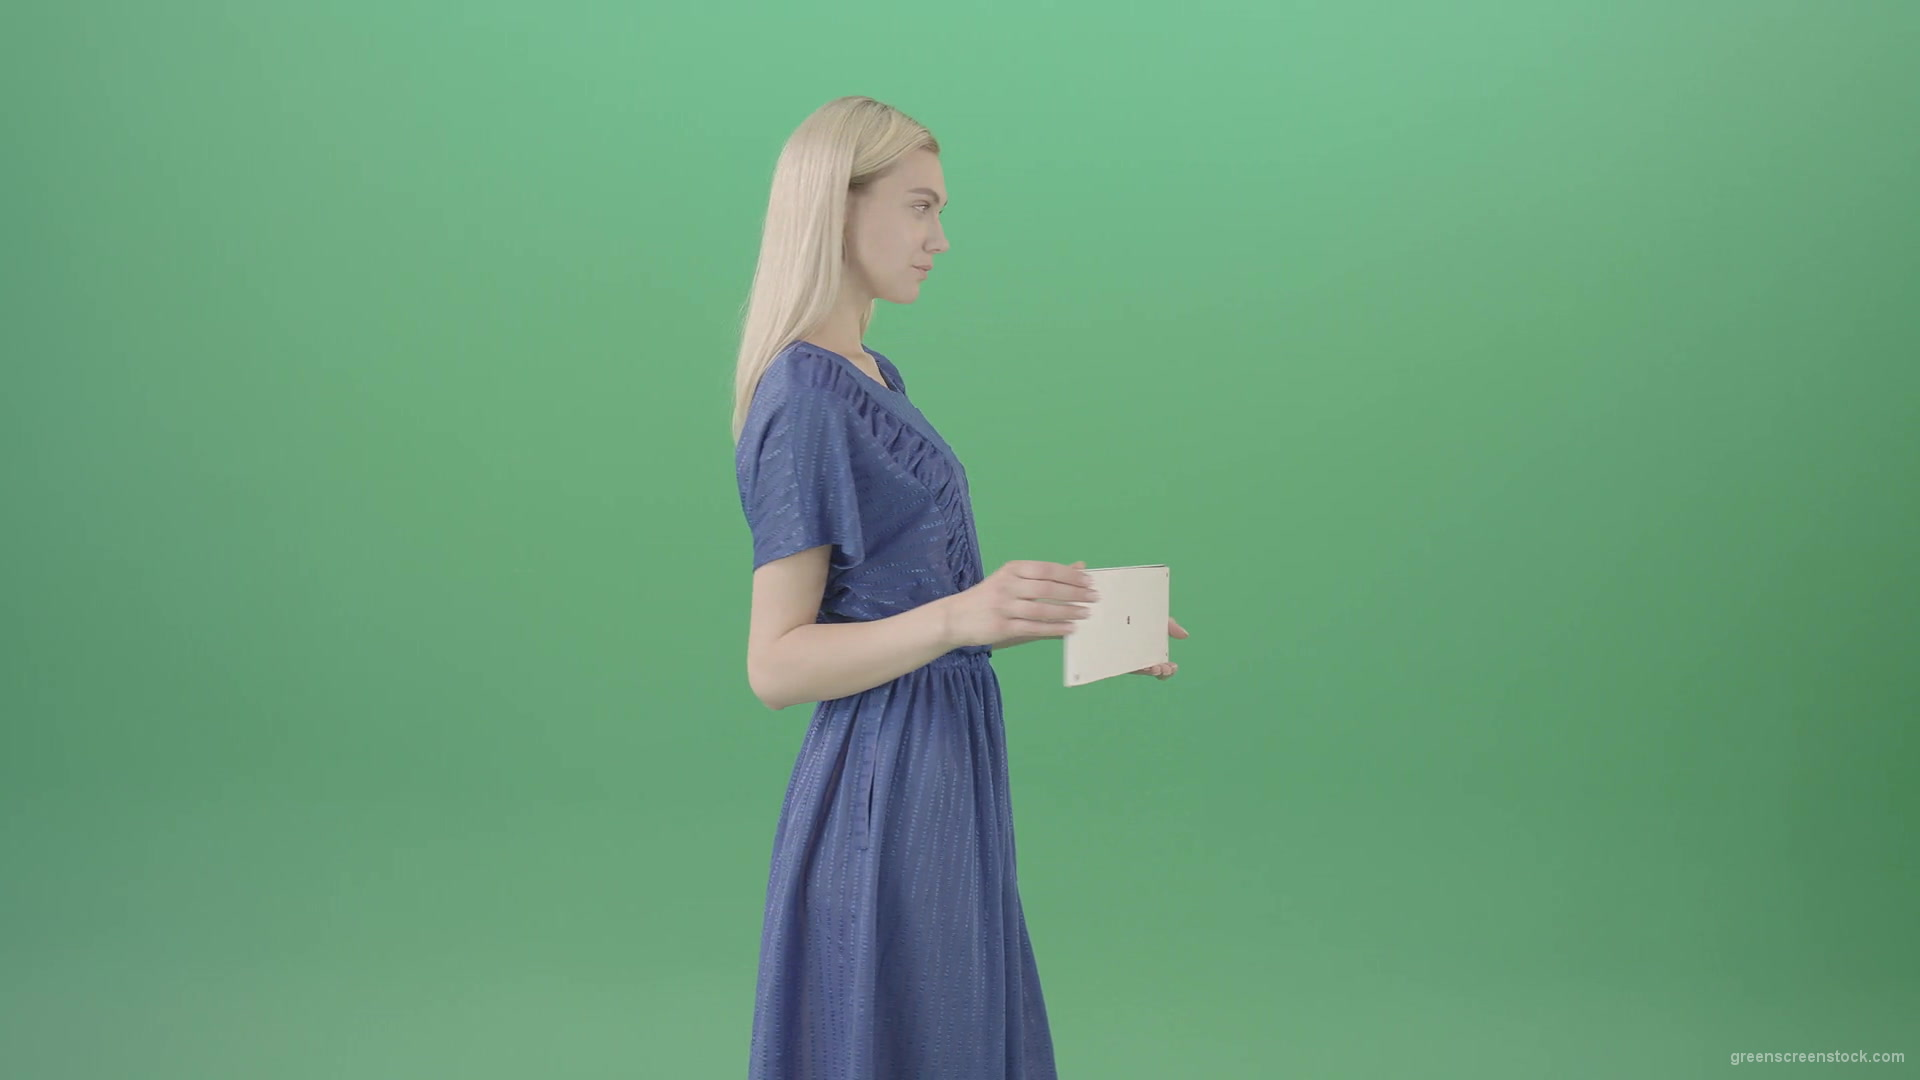 Elegant-Woman-in-blue-dress-posing-with-advertisment-text-plane-mockup-and-posing-isolated-on-Green-Screen-4K-Video-Footage-1920_009 Green Screen Stock